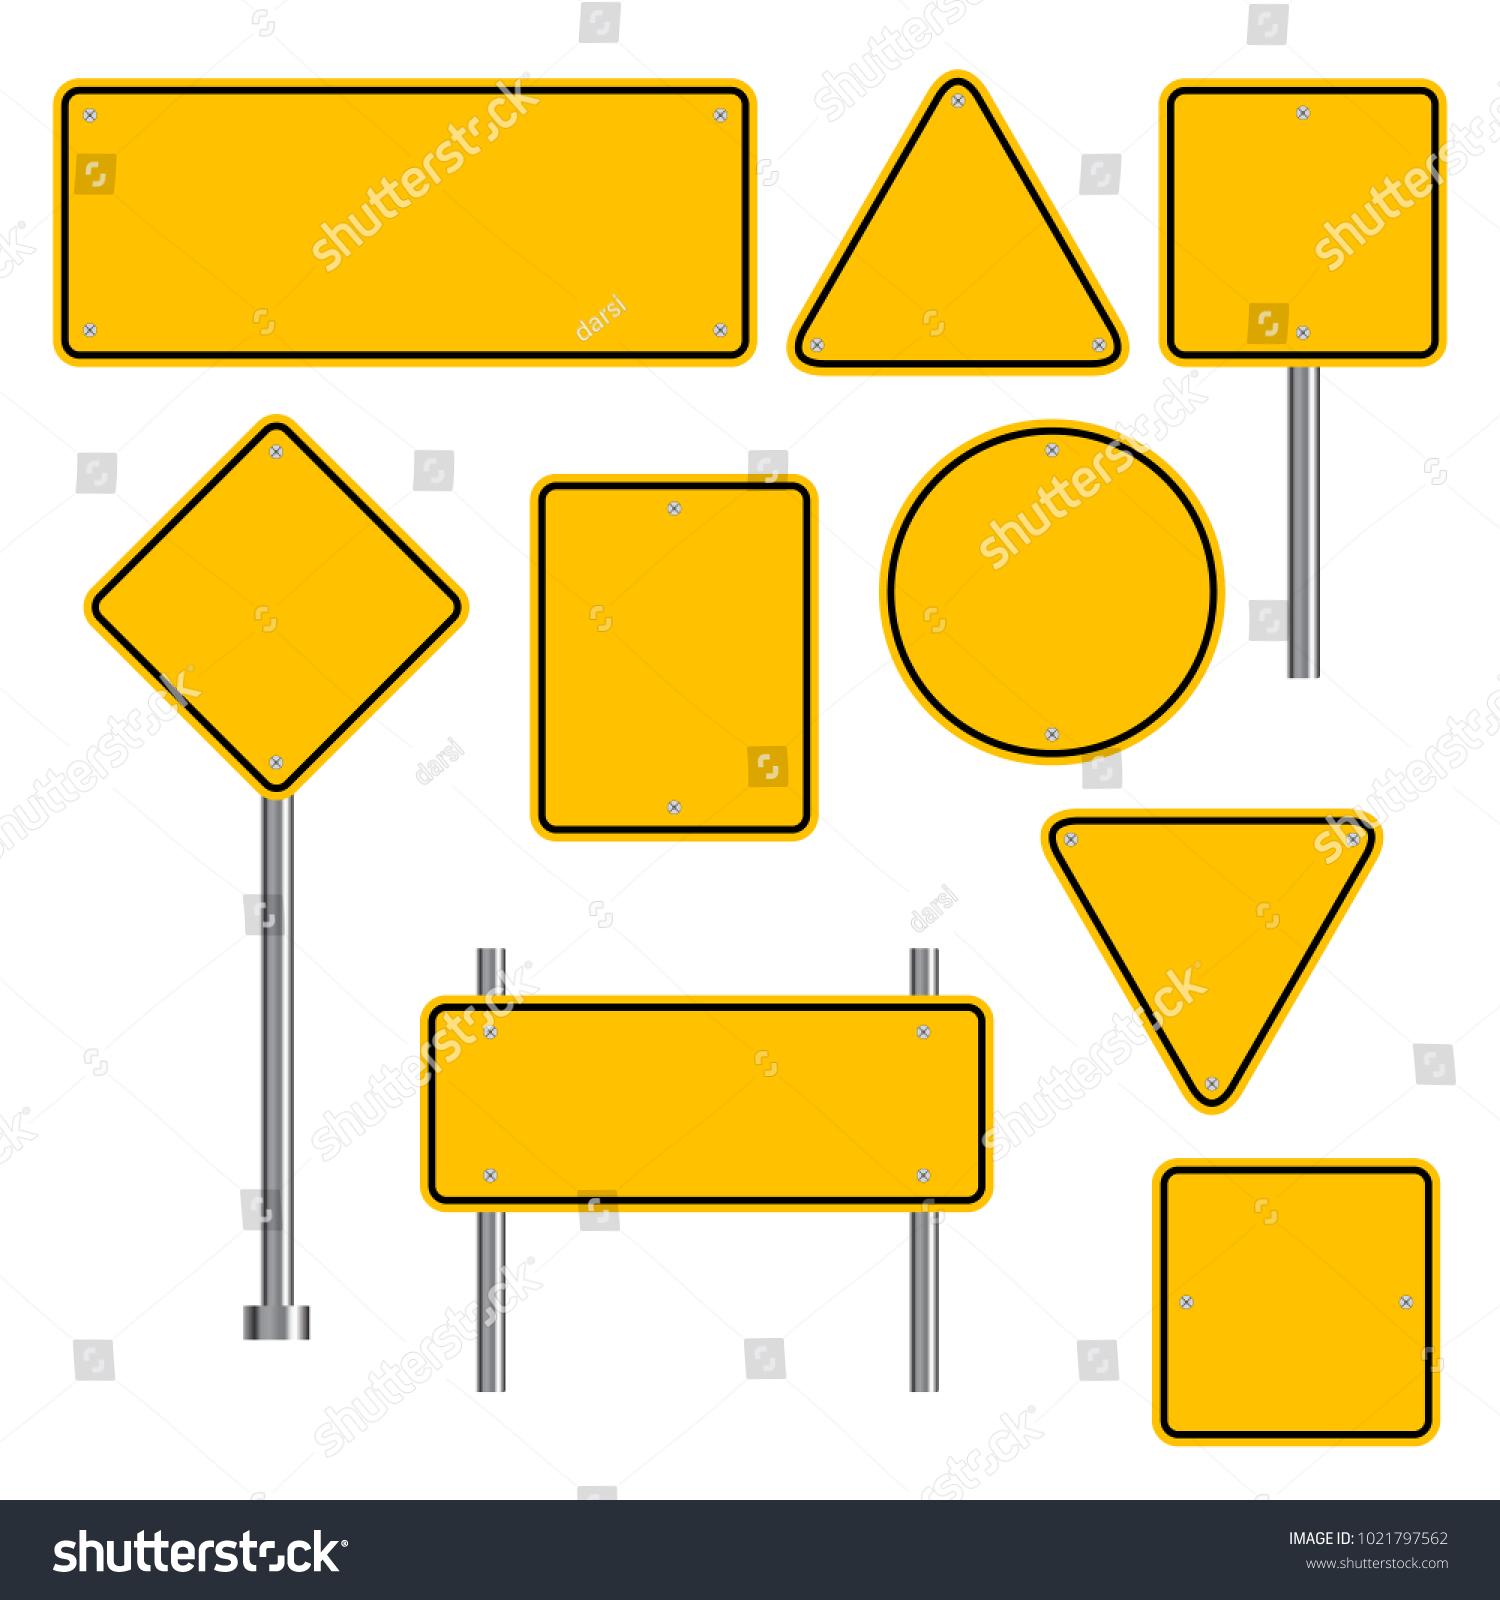 Blank traffic road sign set, empty street signs, yellow isolated on white background, vector illustration. #1021797562